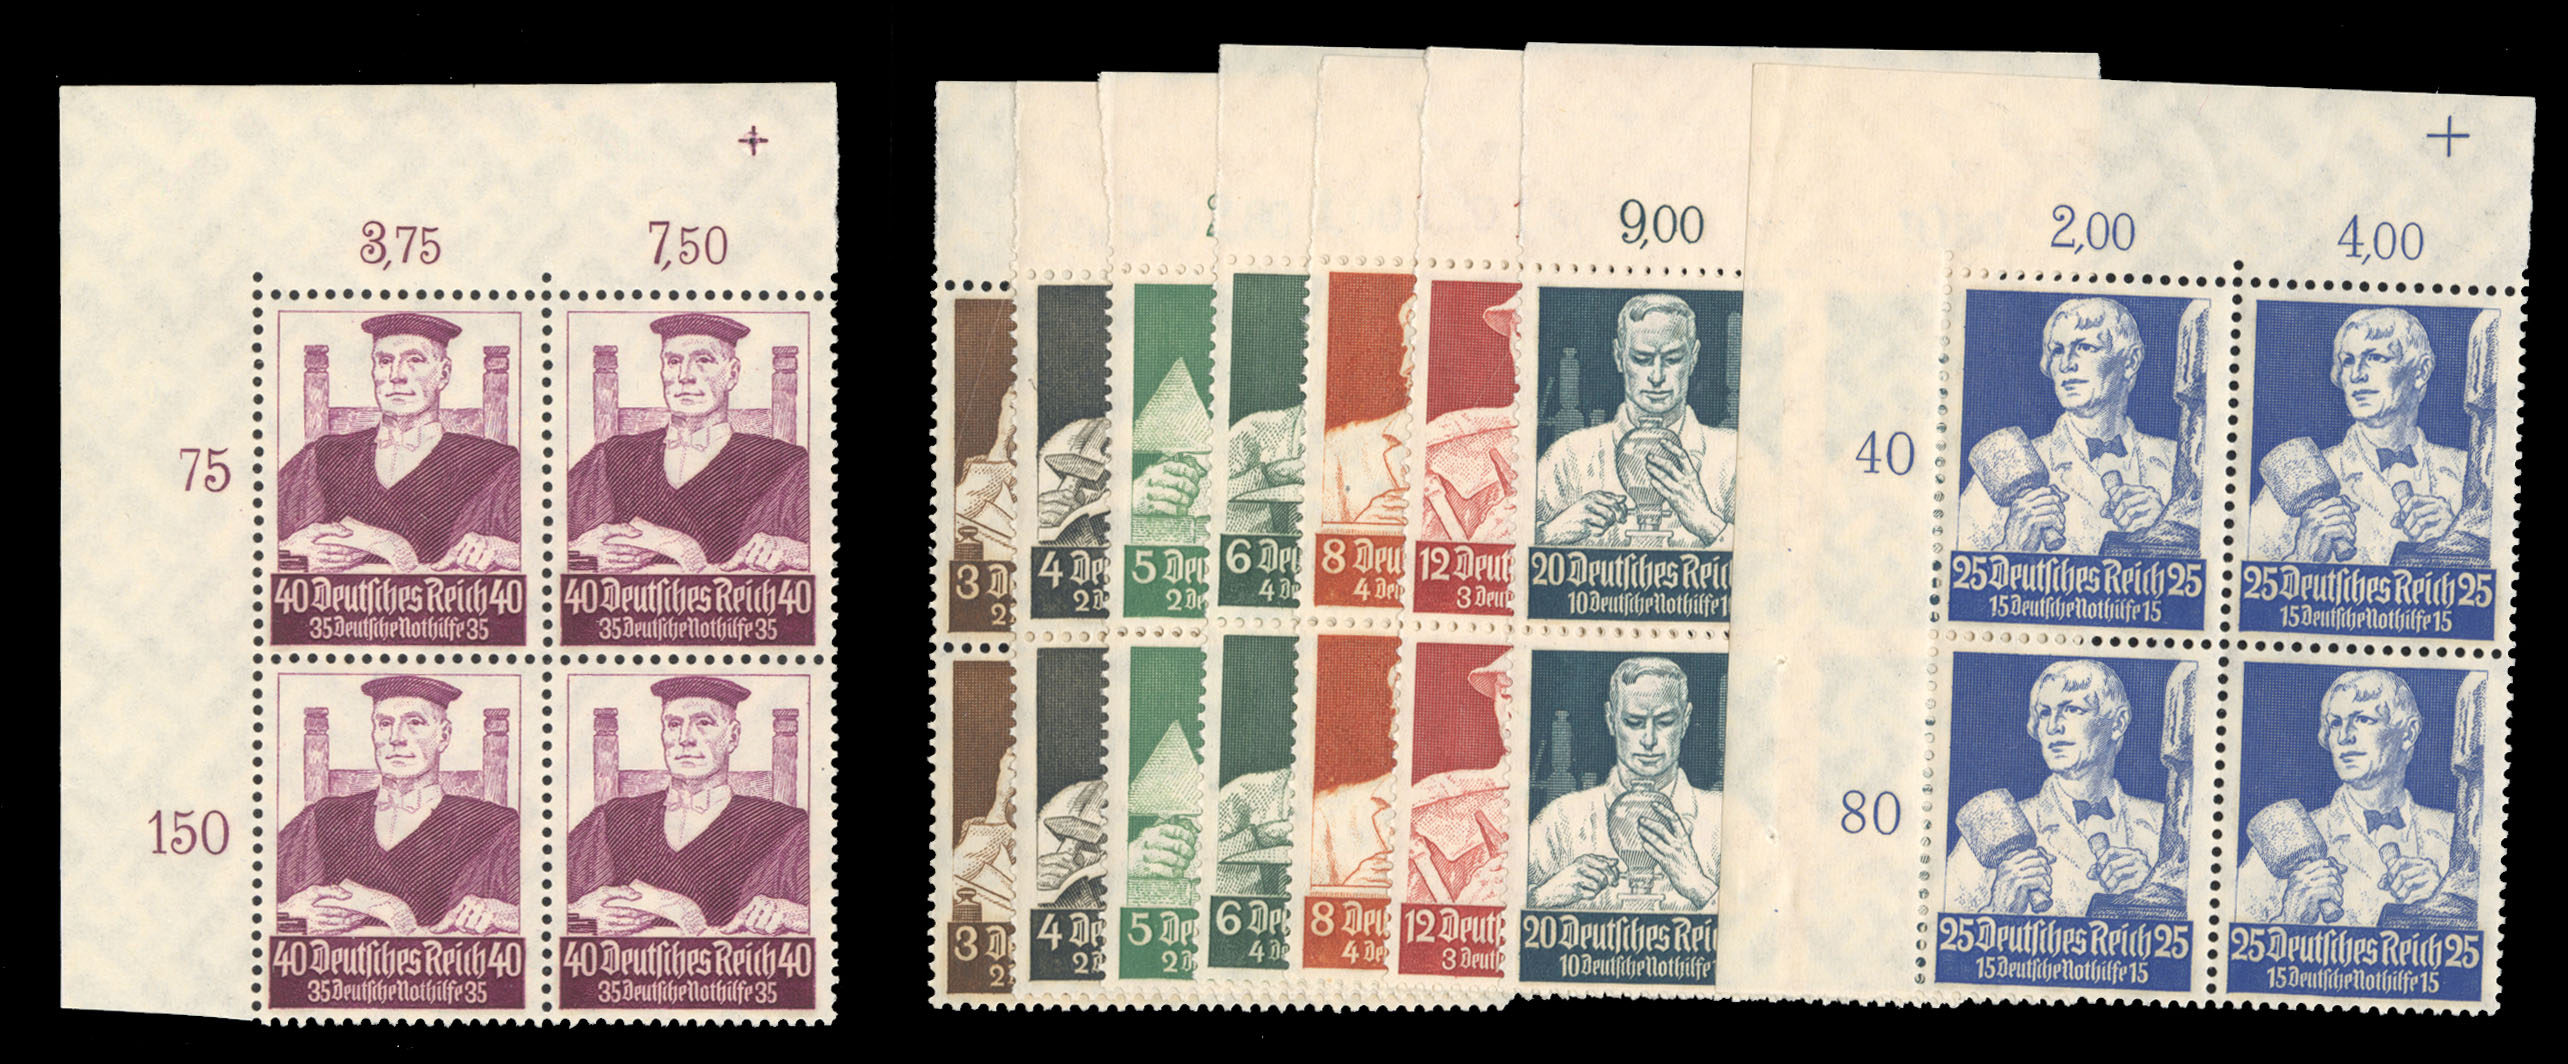 Lot 553 - GERMAN WORLD WAR II OCCUPATION ISSUES Lithuania  -  Cherrystone Auctions U.S. & Worldwide Stamps & Postal History